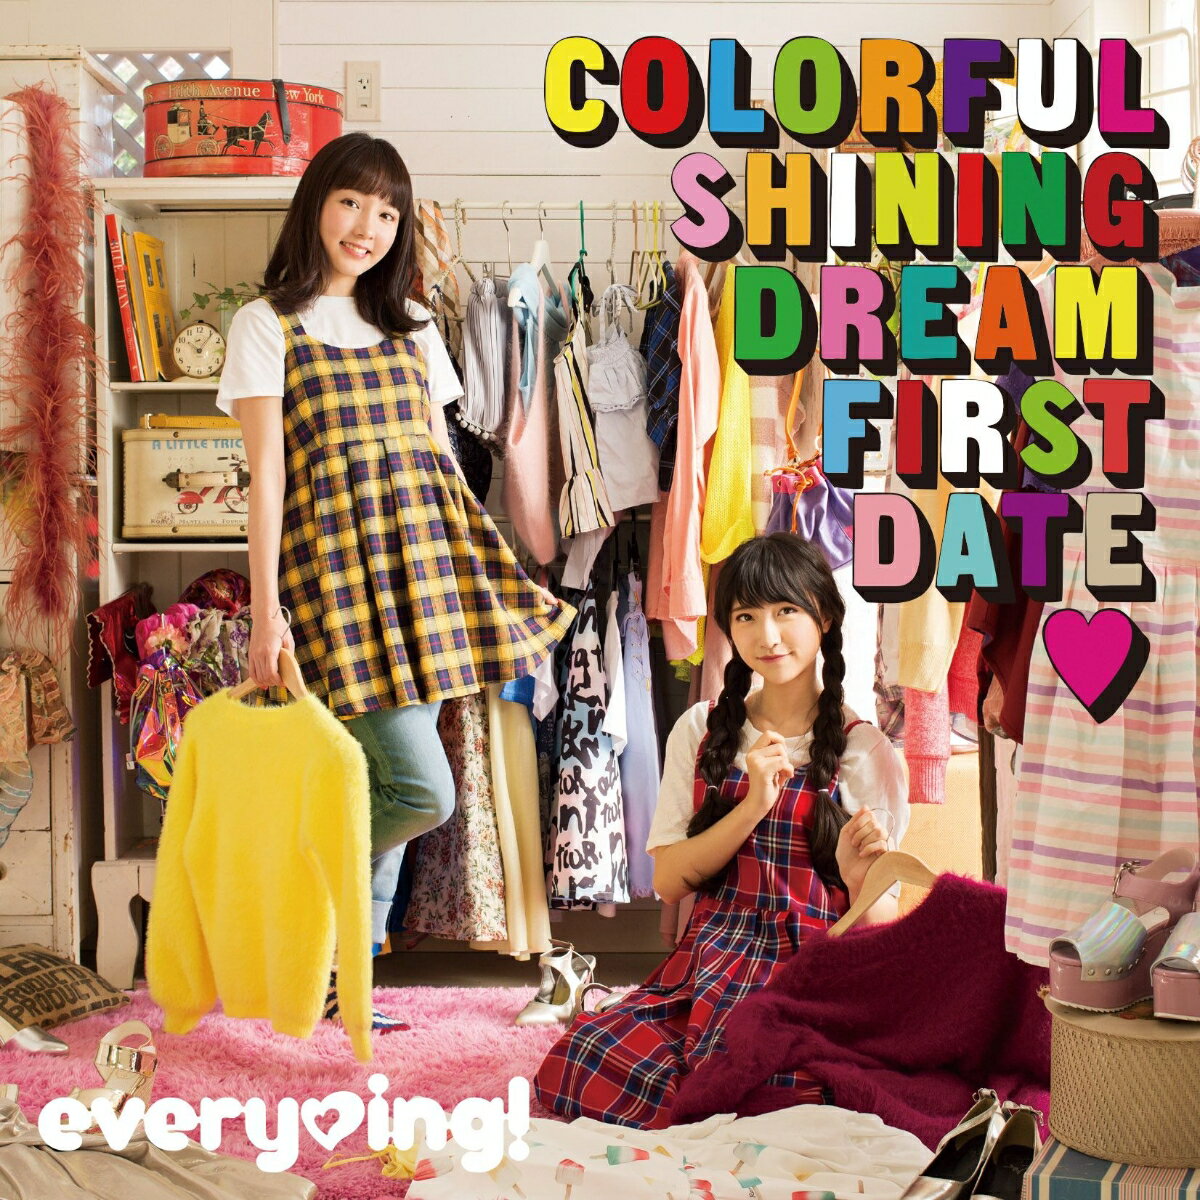 Colorful Shining Dream First Date♥ every ing